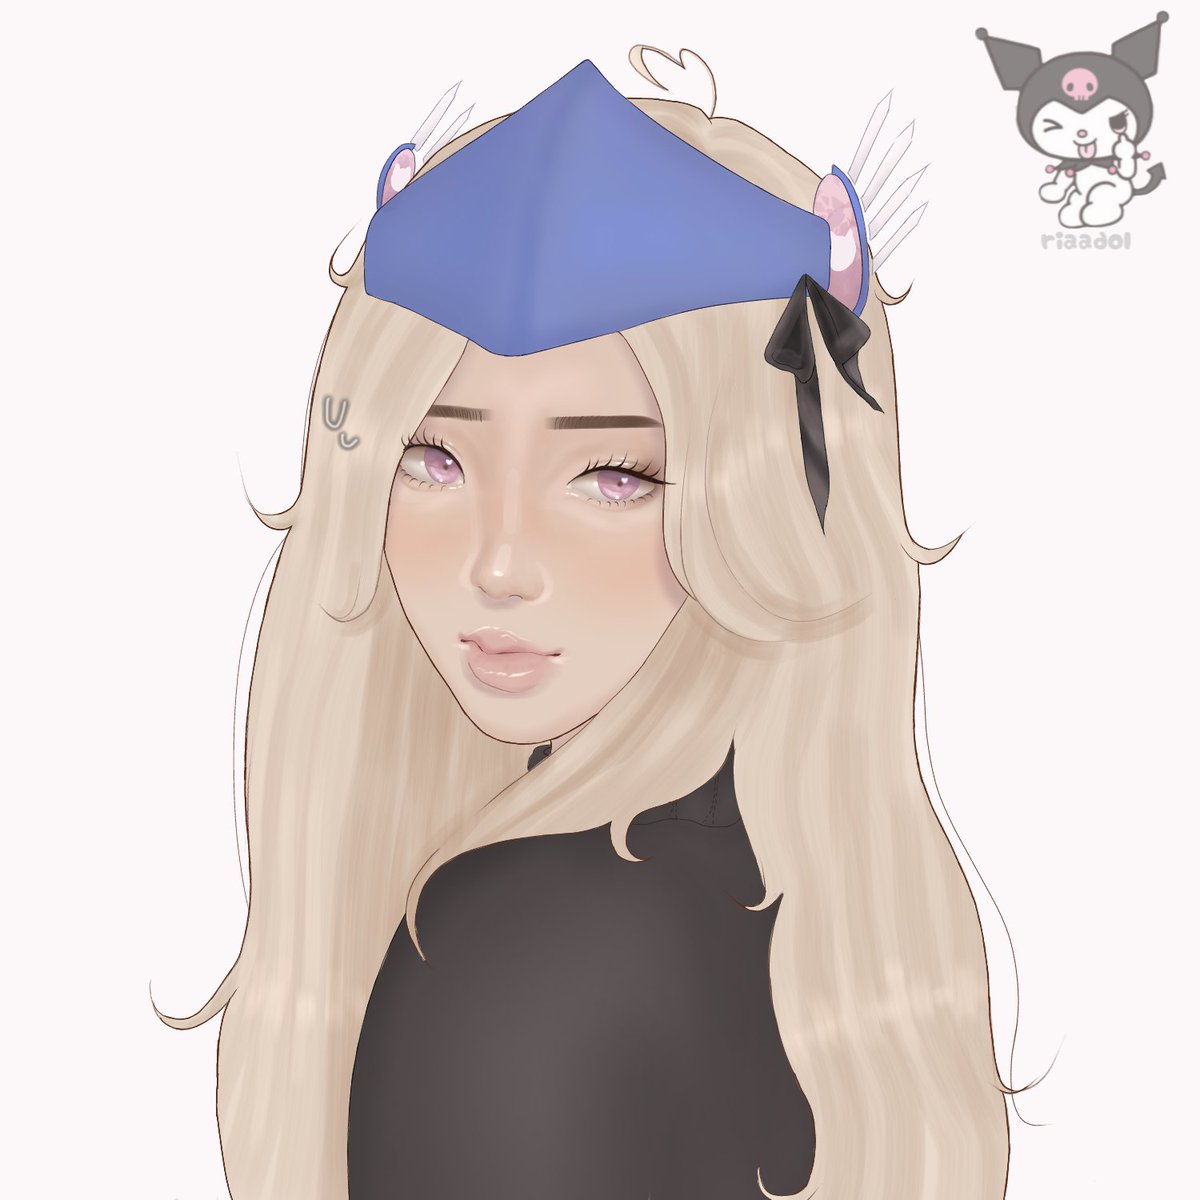 headshot commission for robux!

#robloxart #robloxartist #robloxdev #robloxtwitter #robloxcommission #royalehigh #rtc #rkgk #artmoots